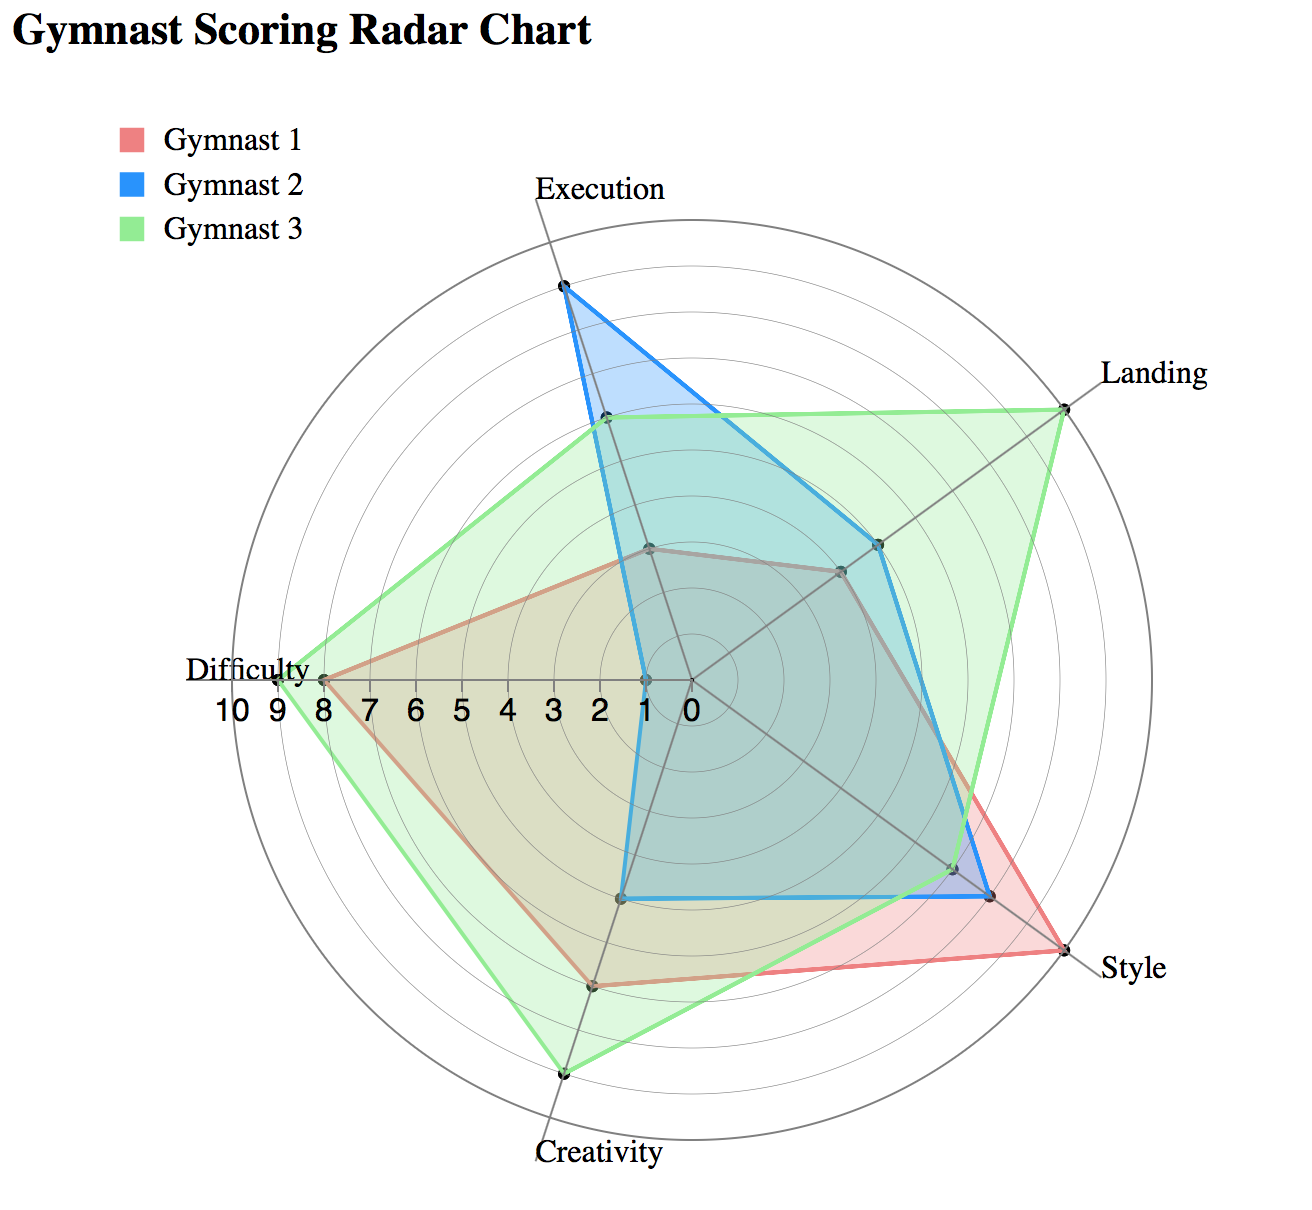 A radar chart comparing scores for different gymnasts